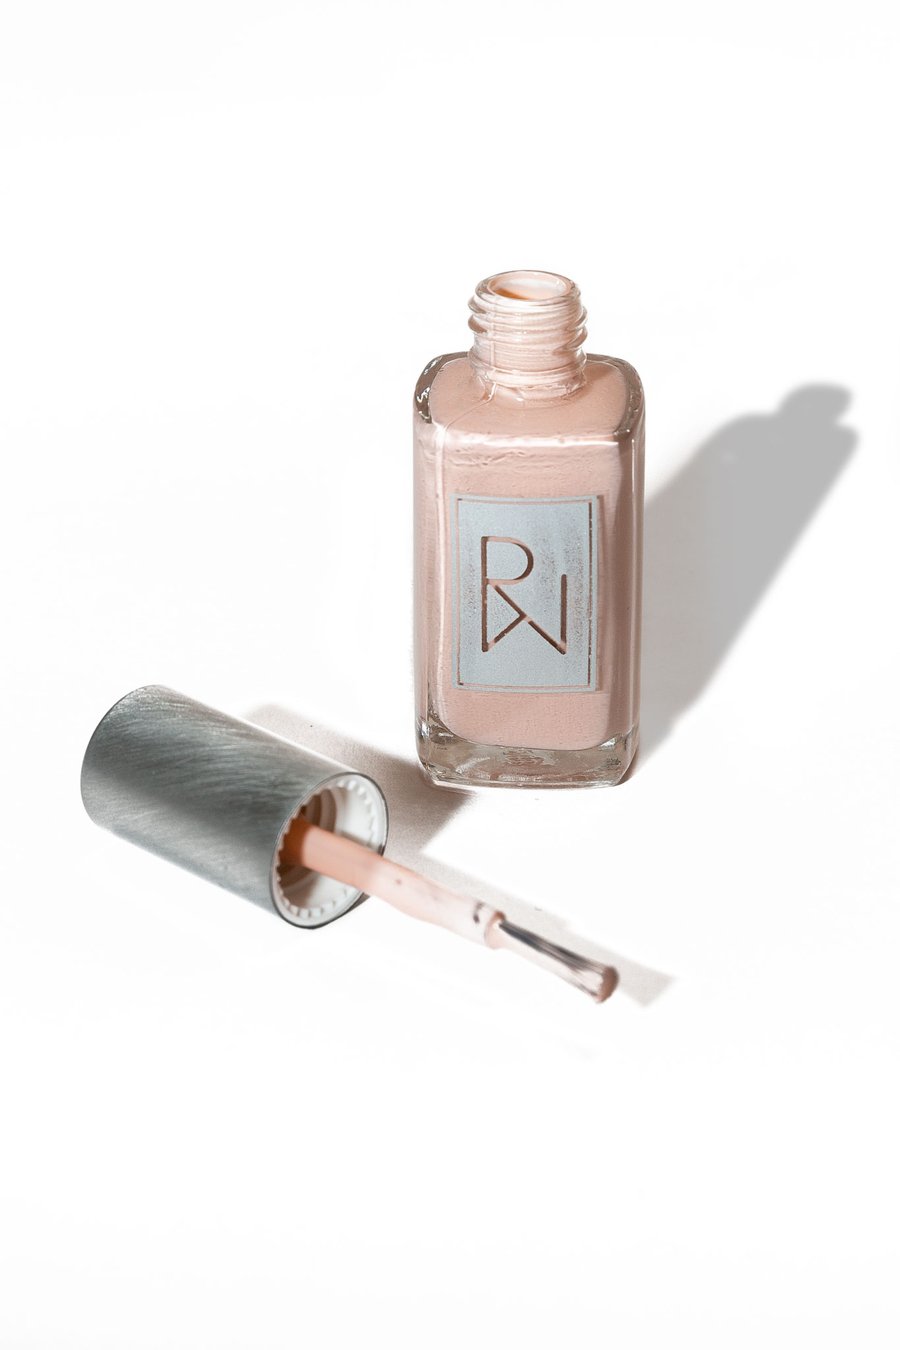 Rooted Woman - Vulnérable - Vernis à ongles bio rose nude